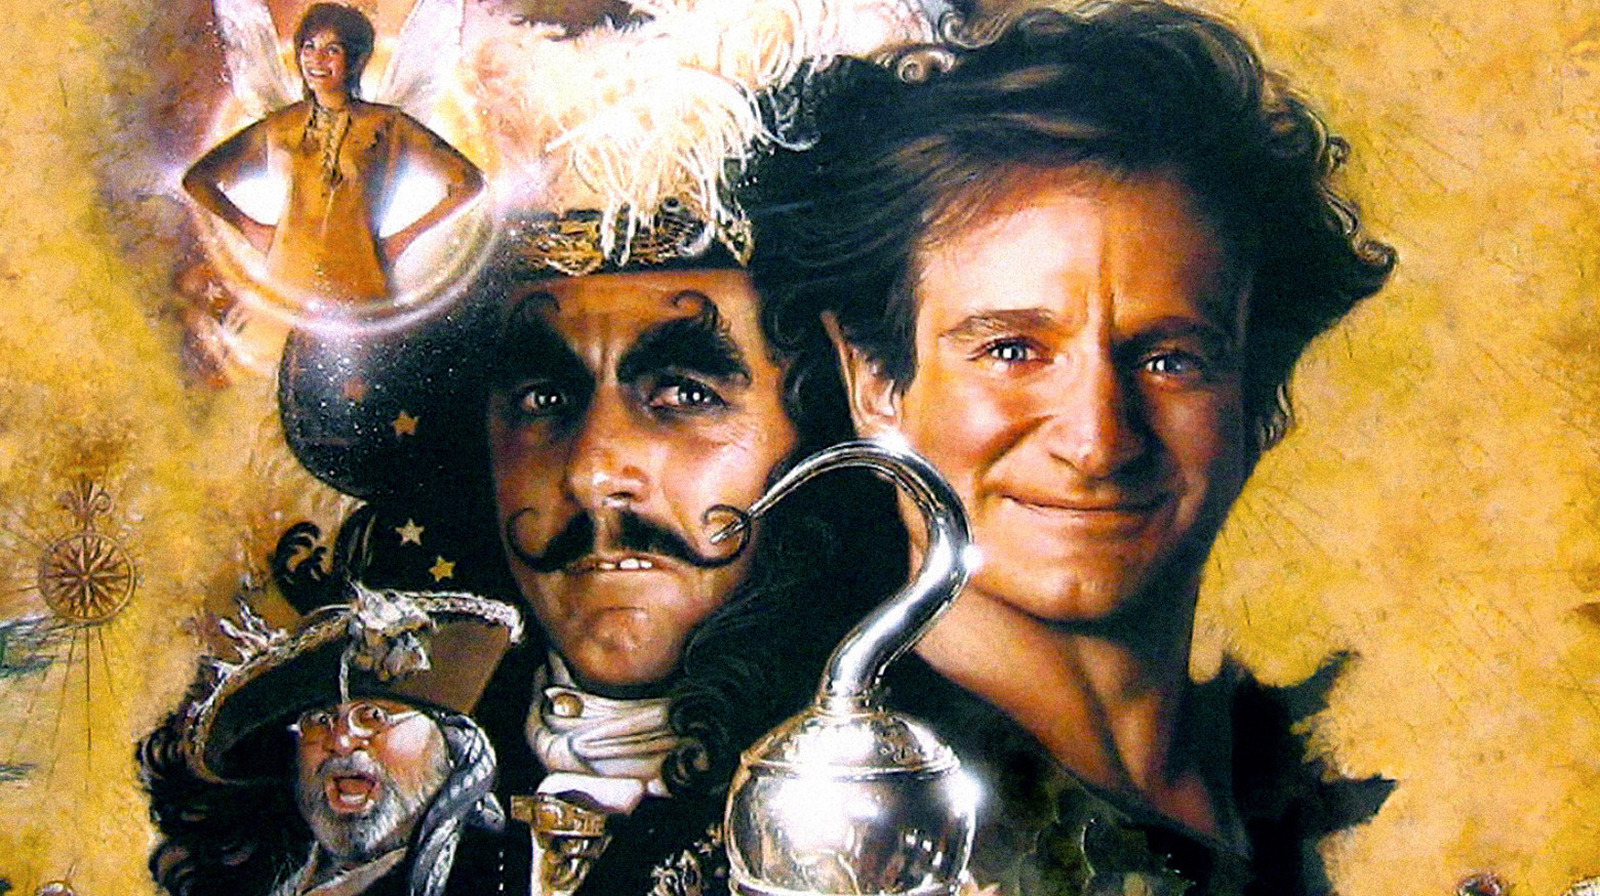 The Star Wars Easter Egg In Hook That Stayed Hidden For Years